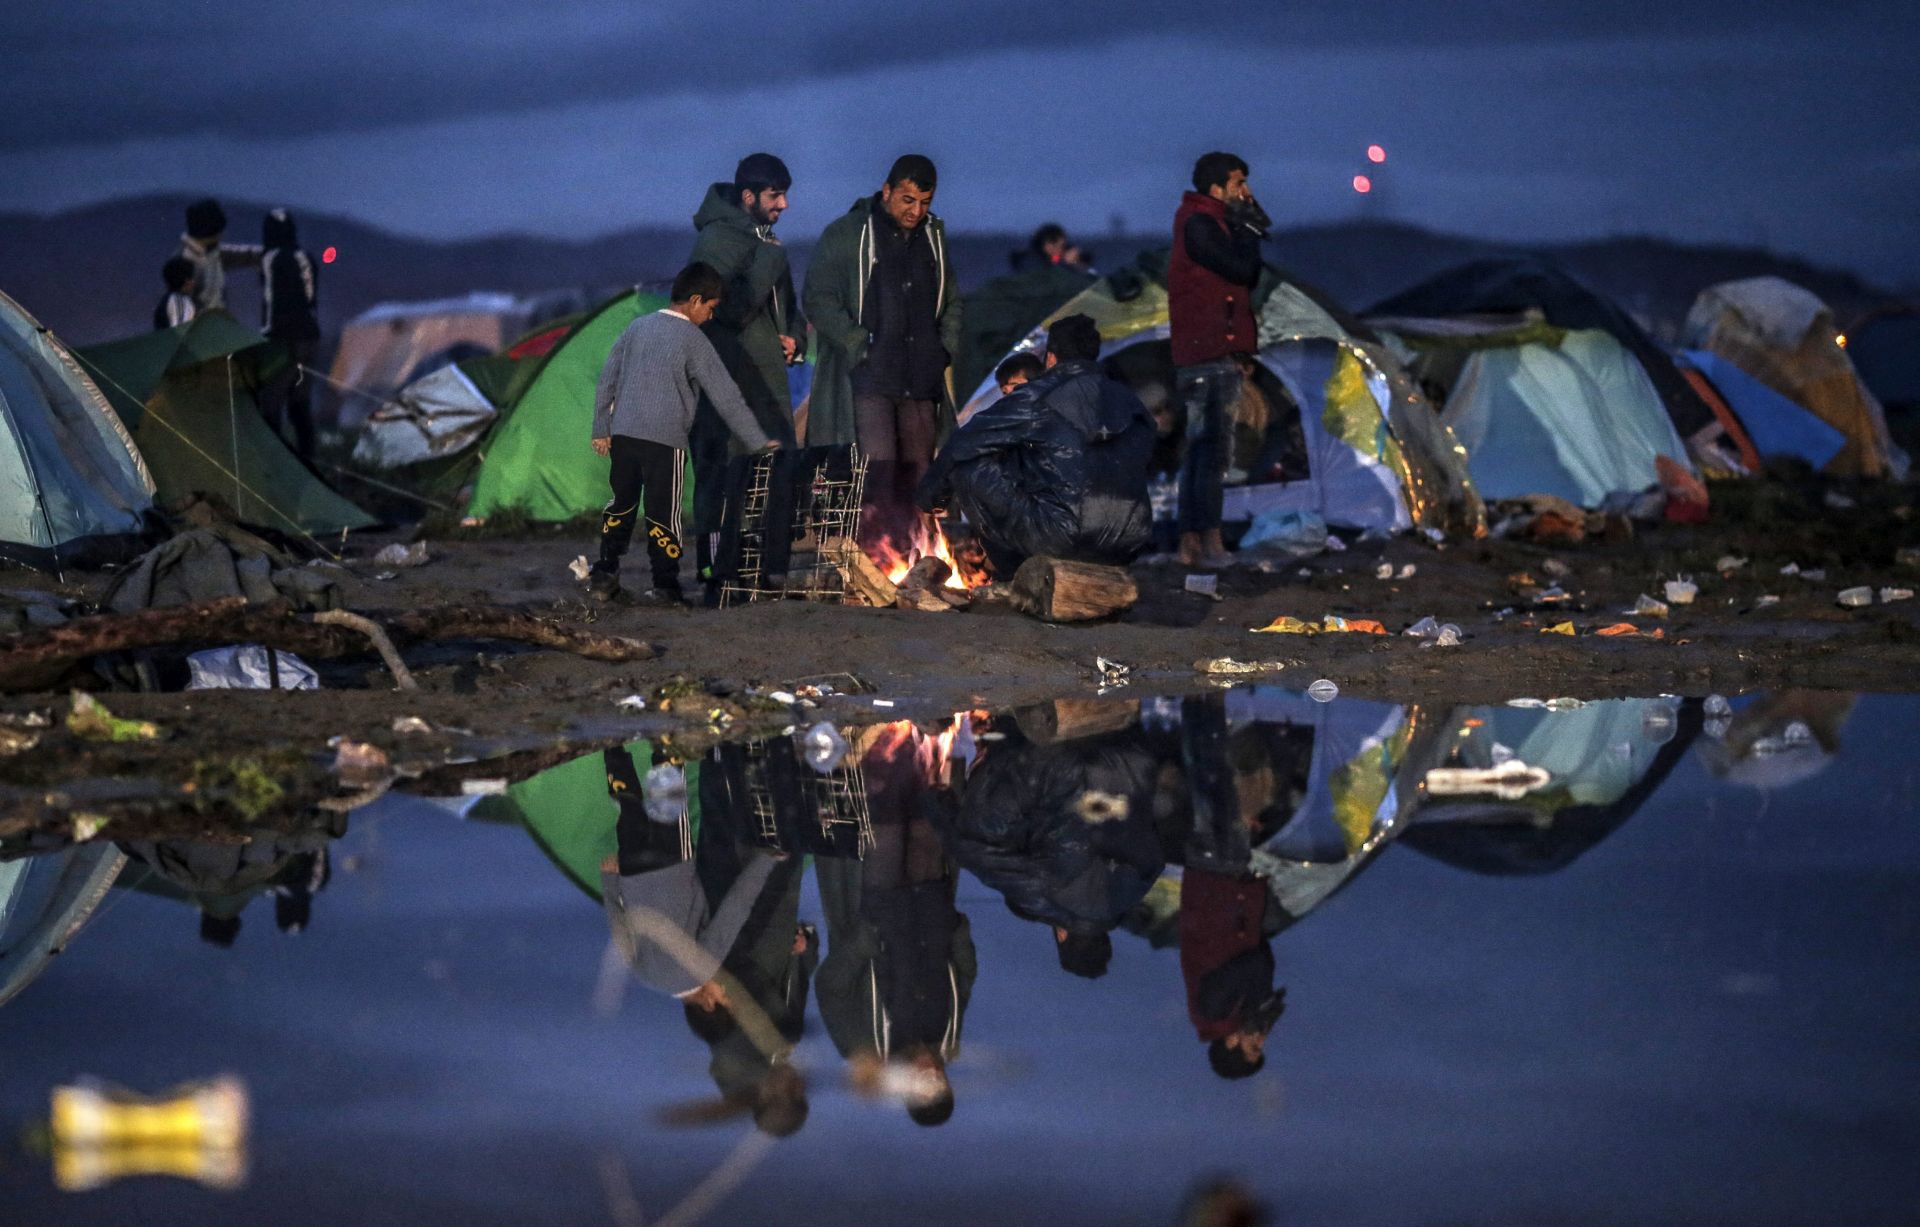 epa05204975 Refugees stand between tents in a camp at the border between Greece and the Former Yugoslav Republic of Macedonia (FYROM), near Idomeni, northern Greece, 10 March 2016. After Slovenia, Croatia, Serbia and Macedonia have sealed their borders to the migration flow, tens of thousands of people are left stranded in Greece, where most migrants enter the European Union to continue on to countries in Europe. Greece estimates that more than 25,000 migrants are presently on its territory, with more than half stuck at the makeshift camp Idomeni, on the border with Macedonia.  EPA/VALDRIN XHEMAJ